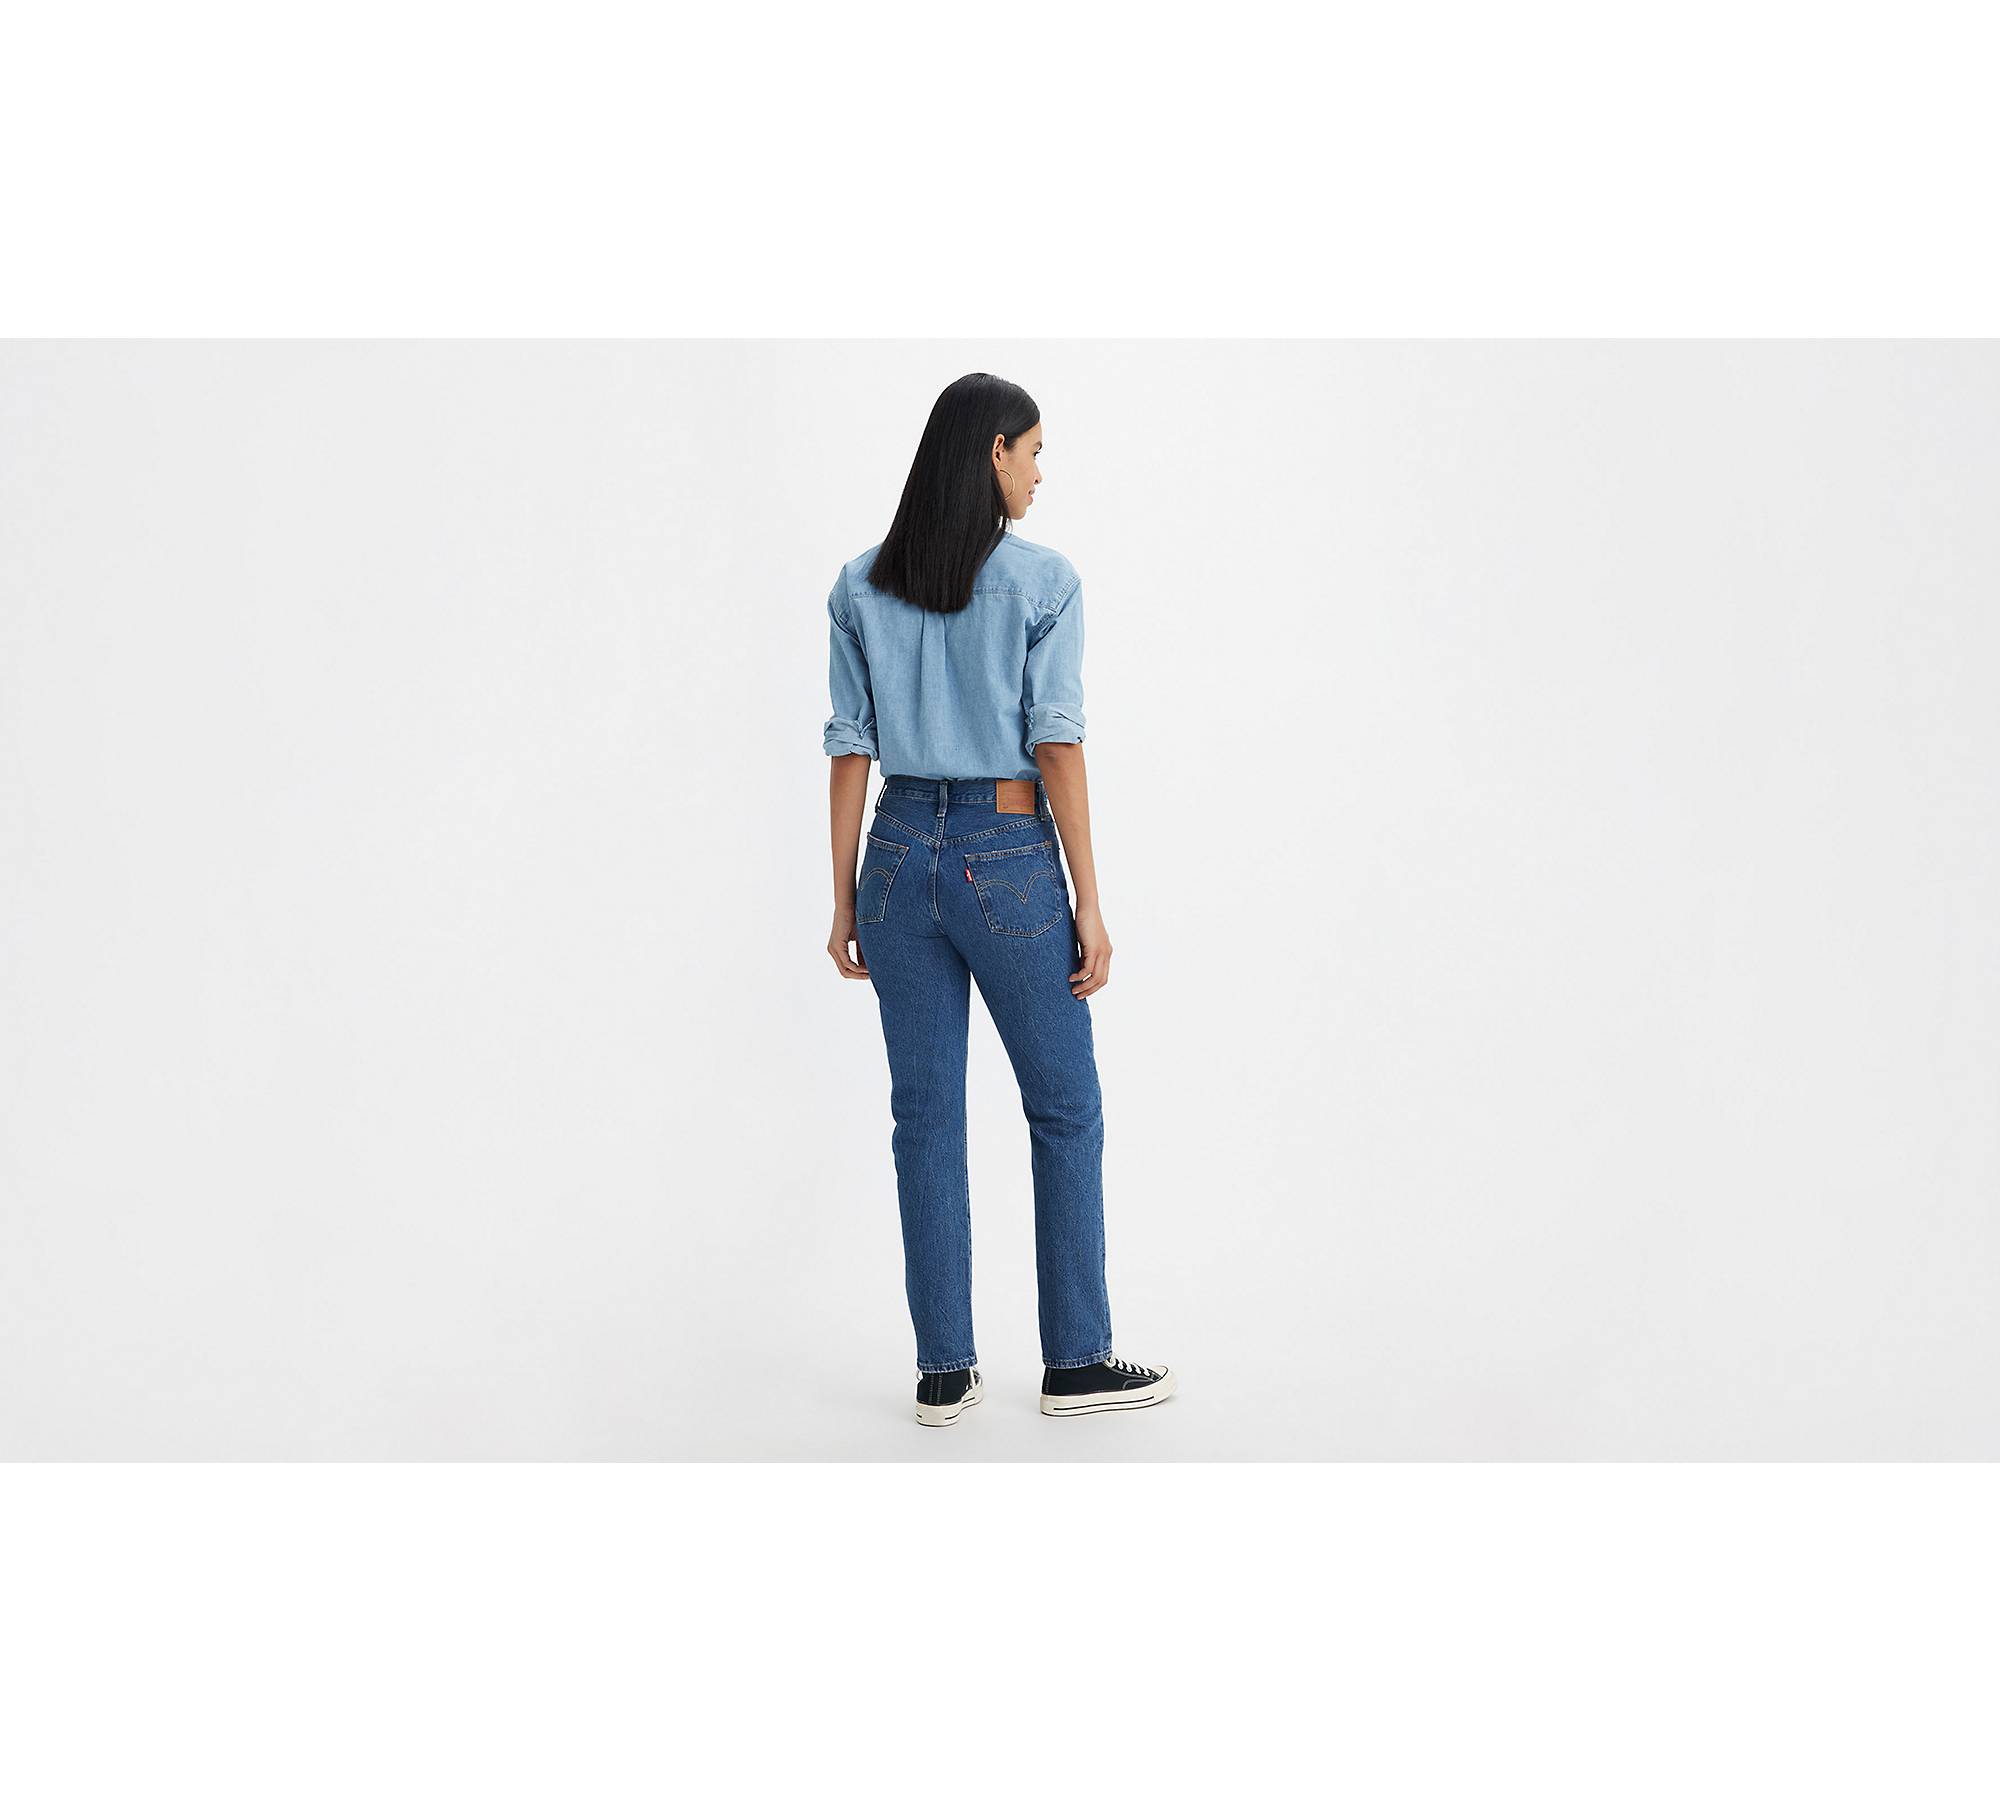 Jeans Mujer 501 Original Fit Azul Oscuro Levis 12501-0395 - Jeans